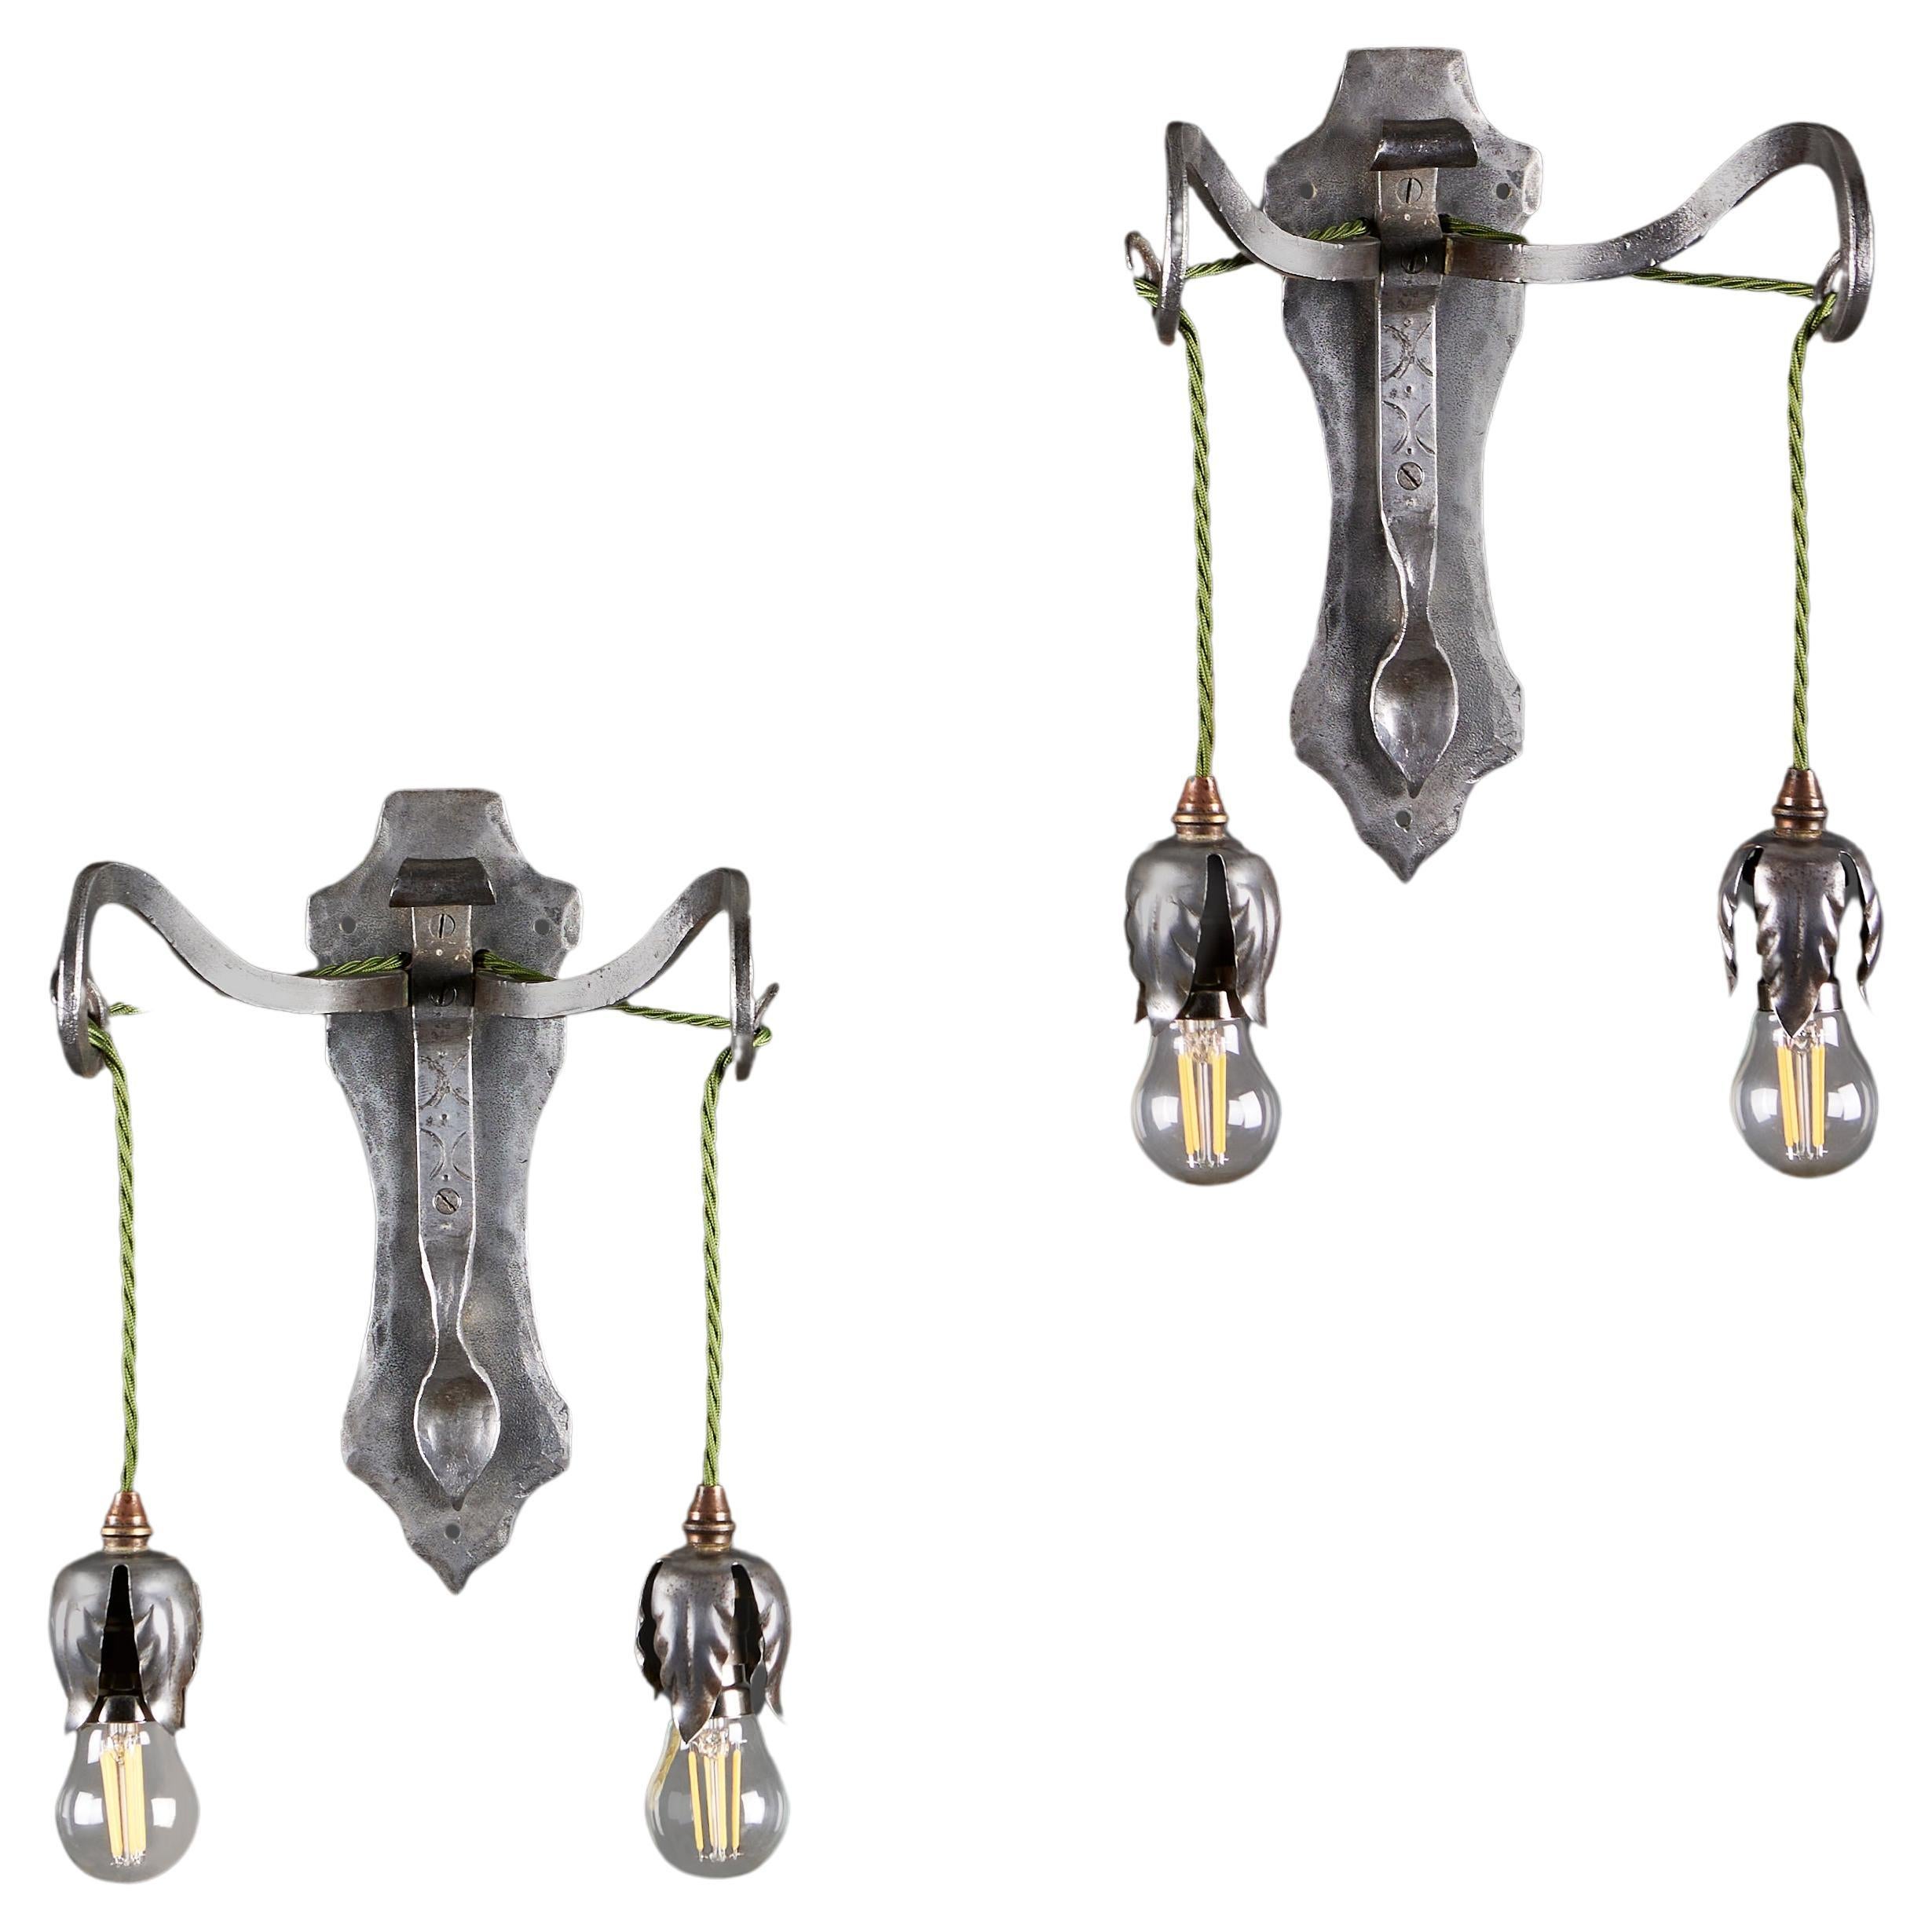 A Pair of Steel Arts and Crafts Wall Lights